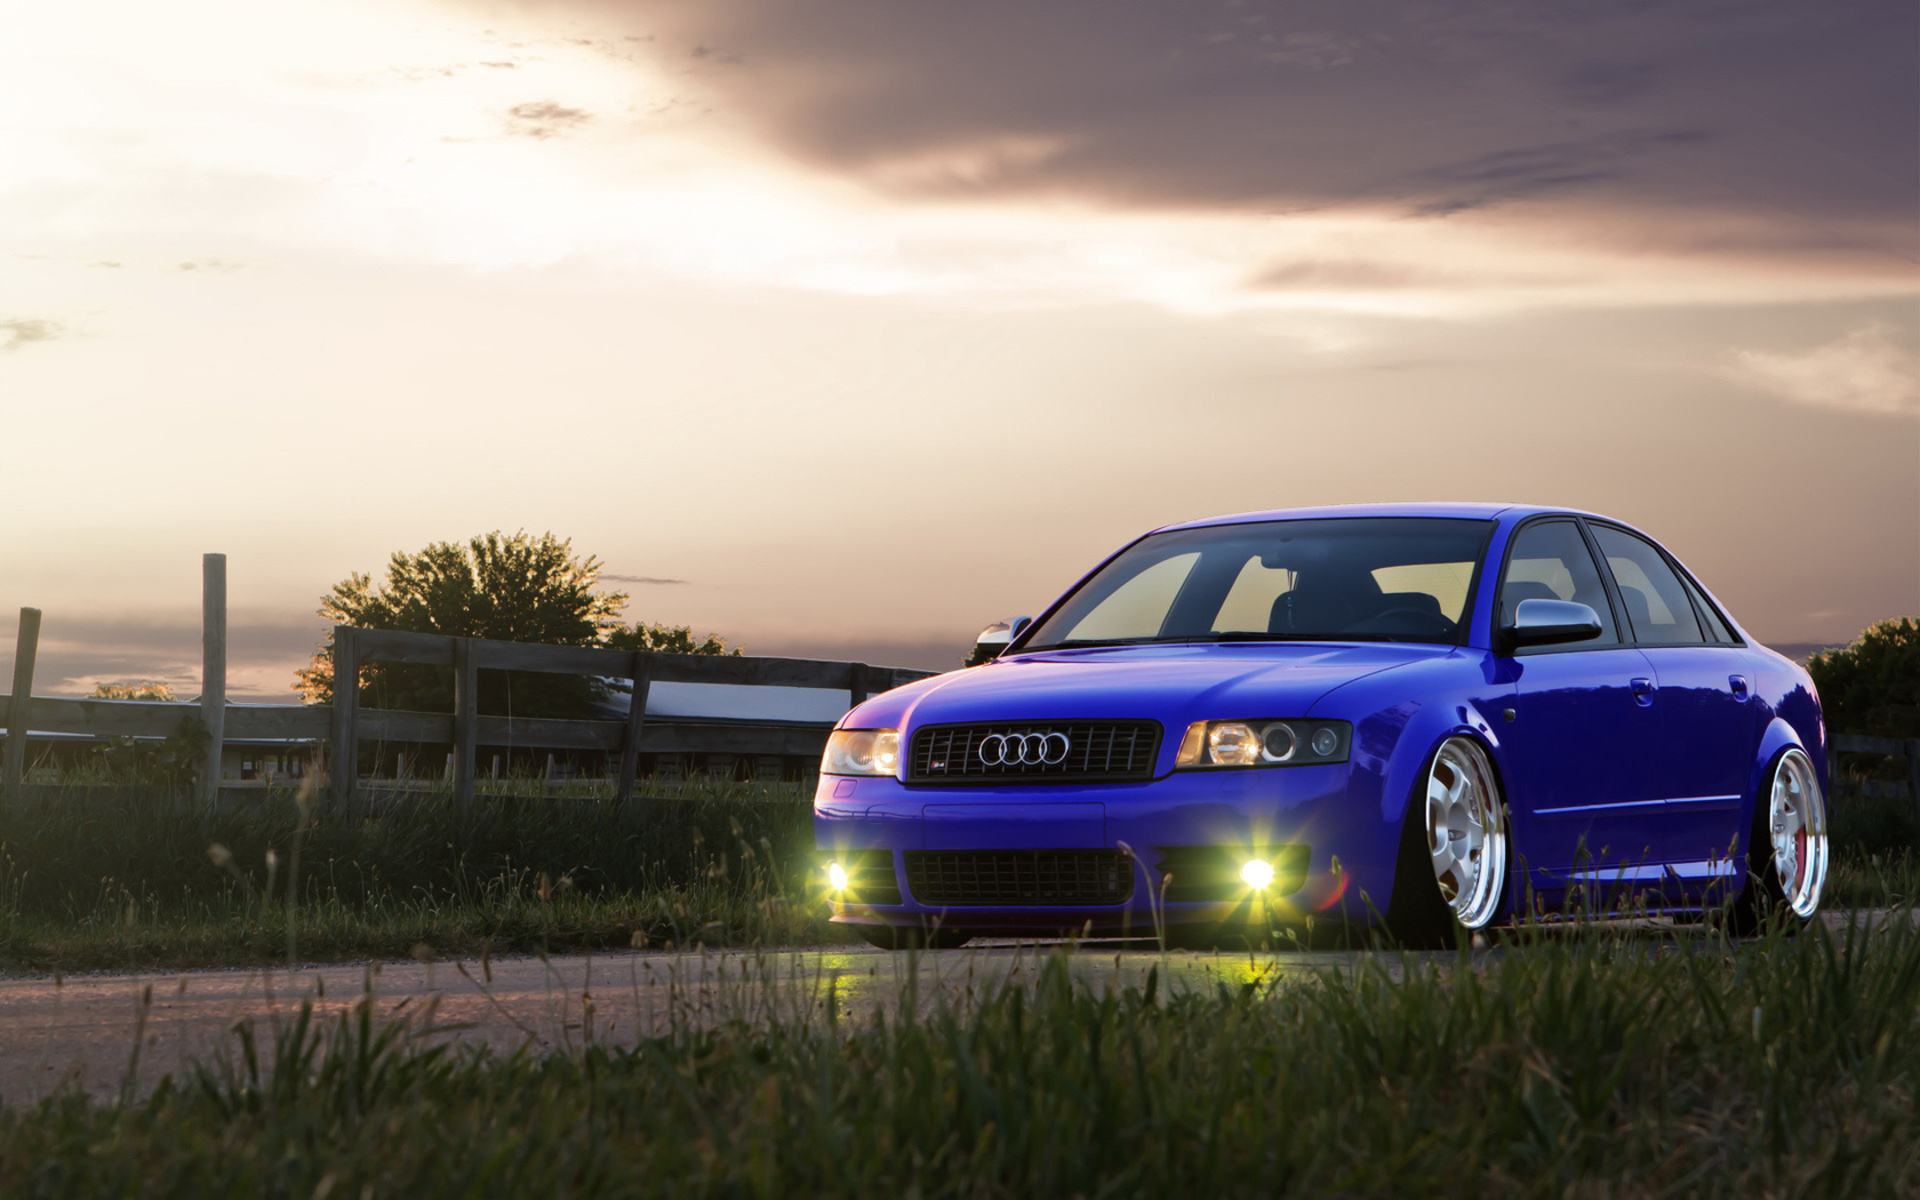 Audi Vehicles Cars Stance Tuning Low Wheels Lights Roads Sky Clouds Grass Wallpapers Hd Desktop And Mobile Backgrounds